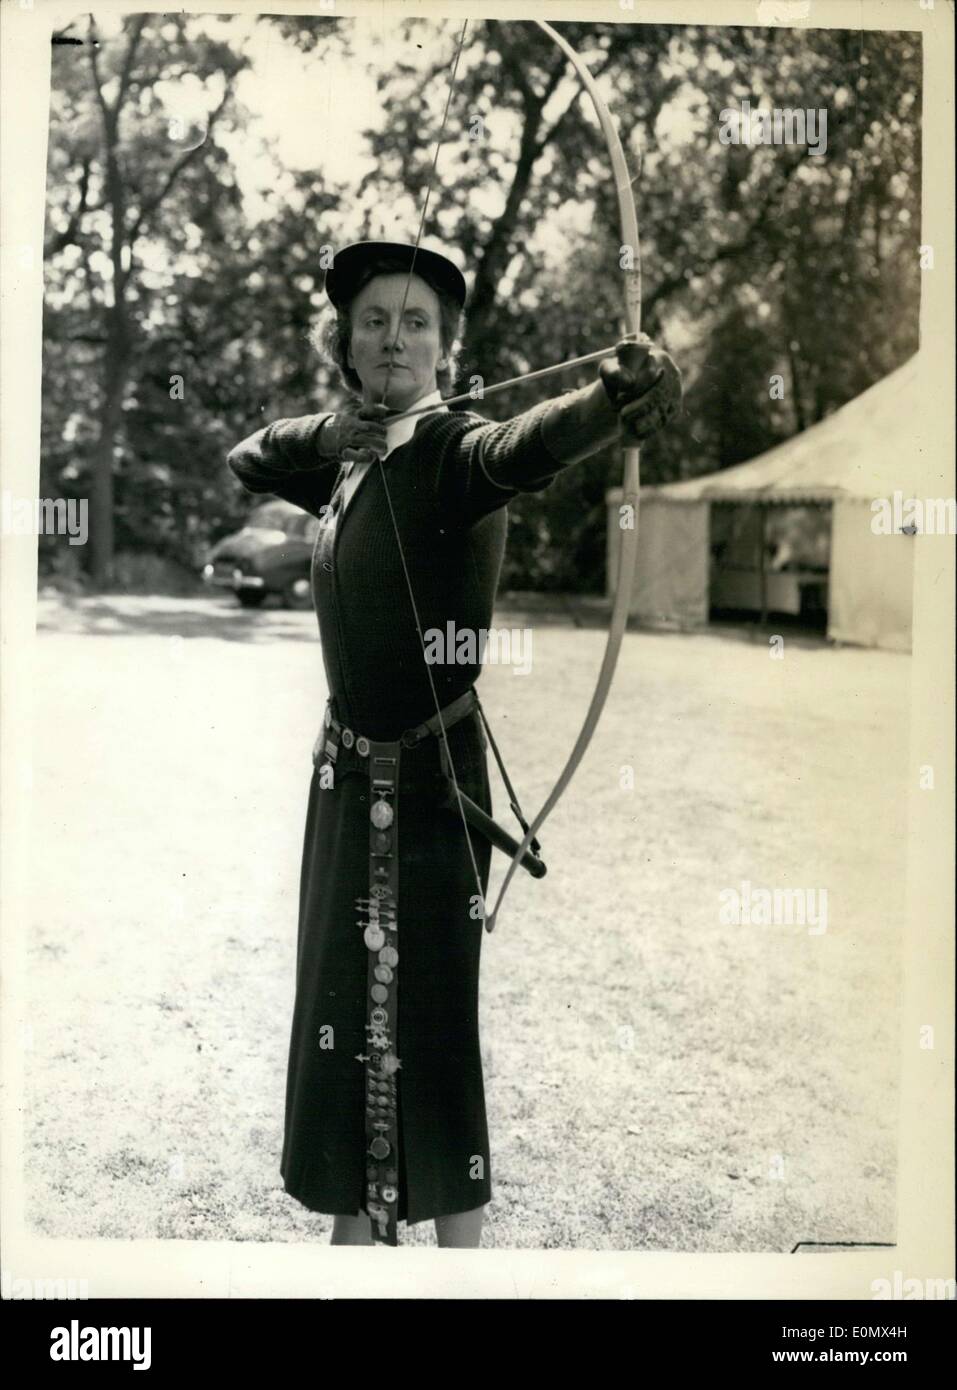 Jul. 25, 1956 - Grand National Archery Meeting. British Champion takes aim: The 103rd meeting of the Grand National Archery Society was held today at Worcester College, Oxford. Photo shows Mrs. VyVyan Patricia Flower the British Champion taking a practice aim before a match today with some of her many awards on a belt at Oxford. Stock Photo